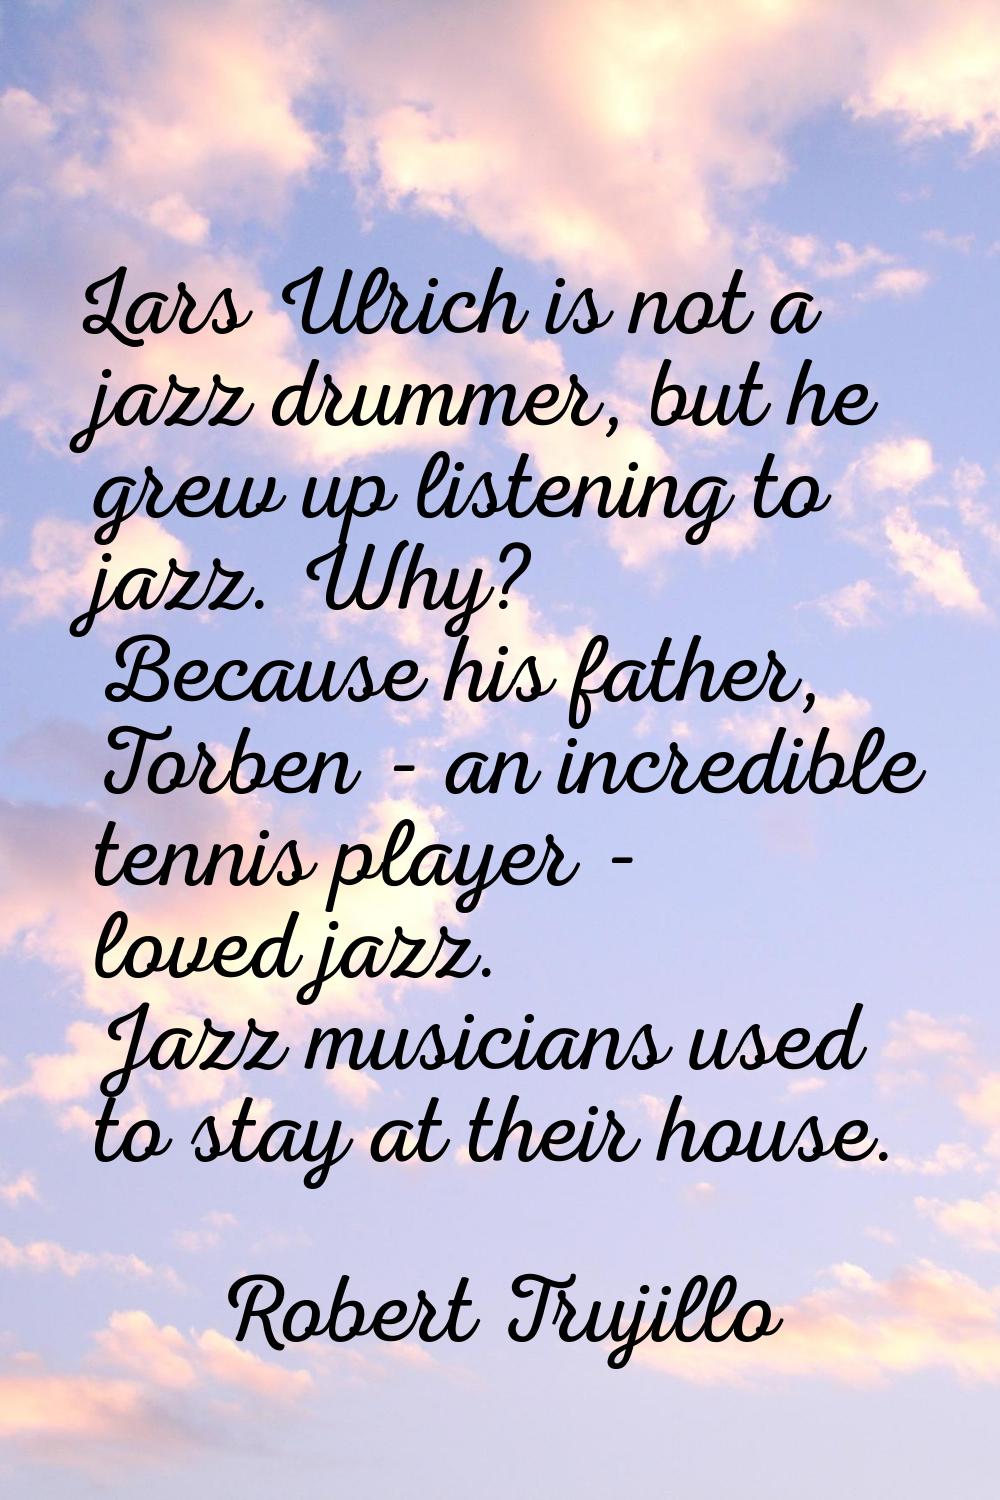 Lars Ulrich is not a jazz drummer, but he grew up listening to jazz. Why? Because his father, Torbe